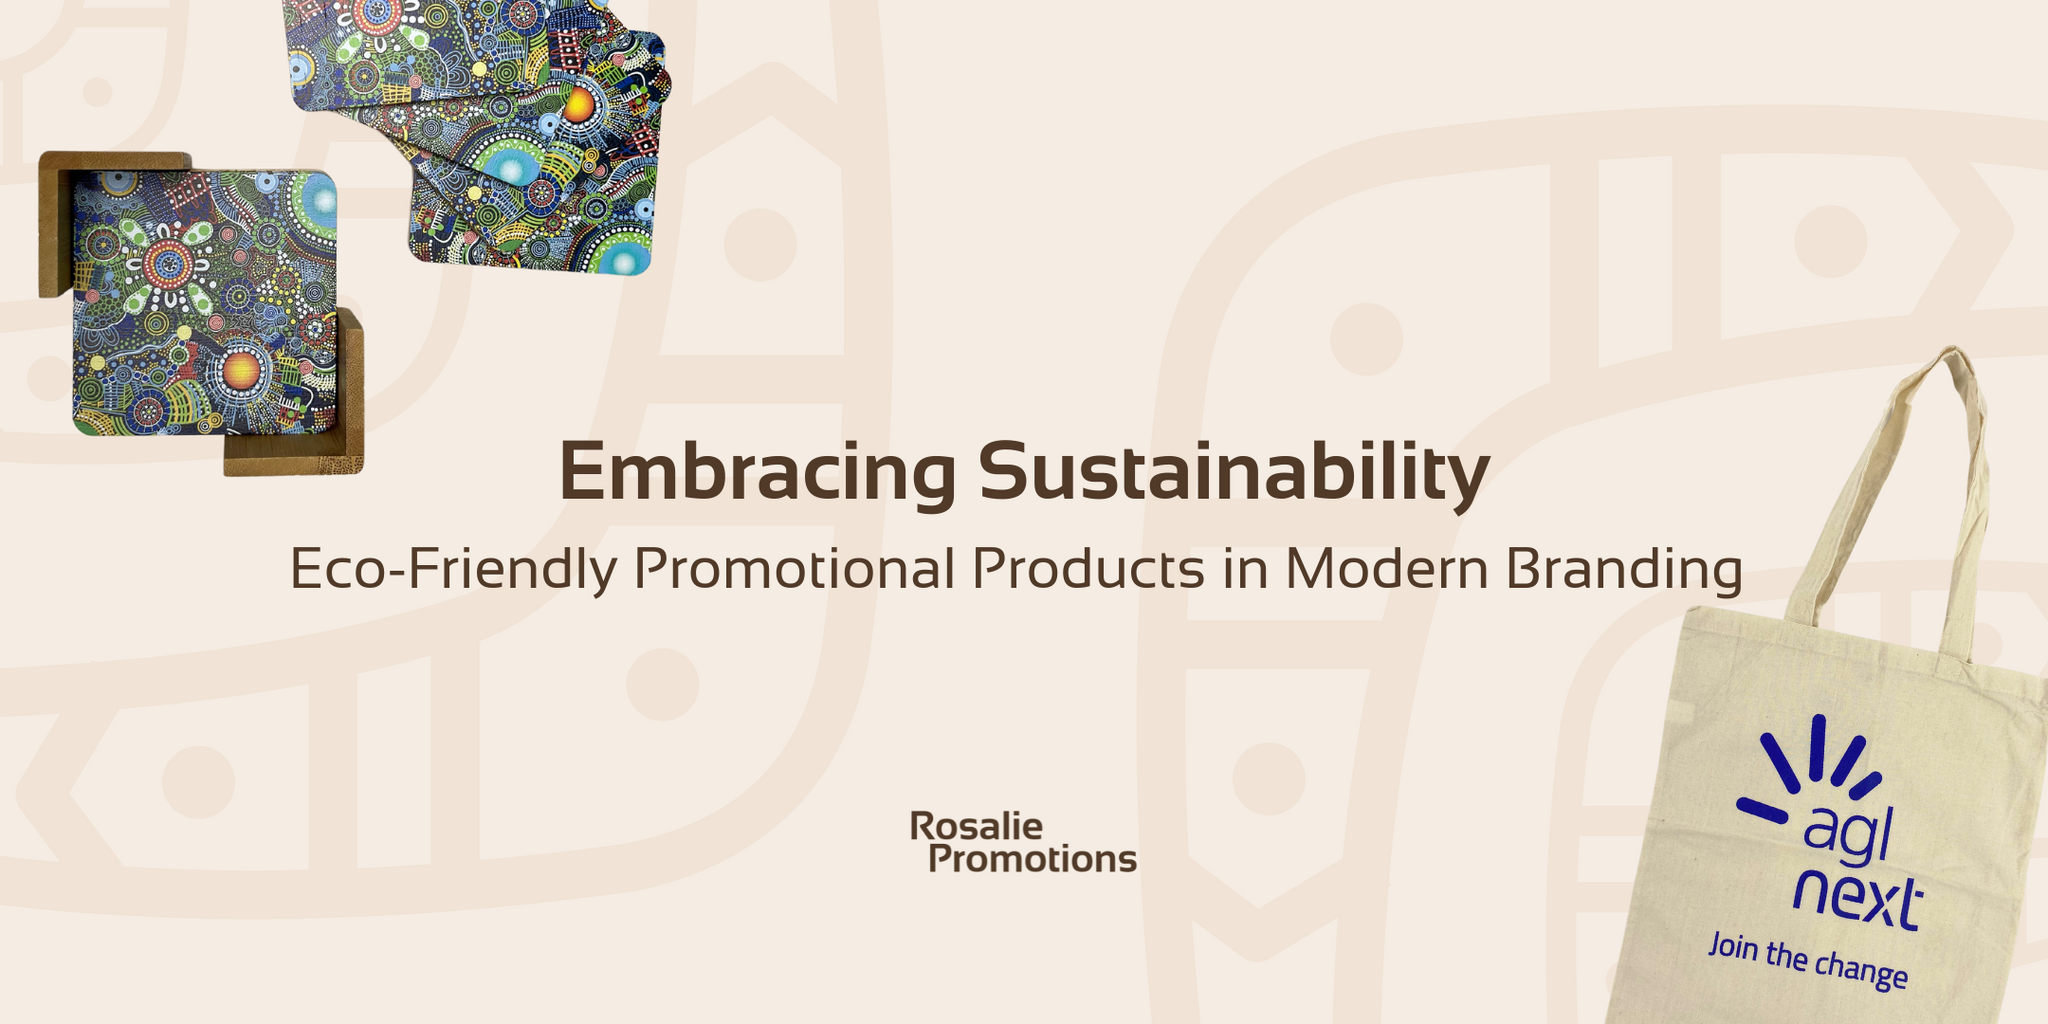 Embracing Sustainability: The Role of Eco-Friendly Promotional Products in Modern Branding